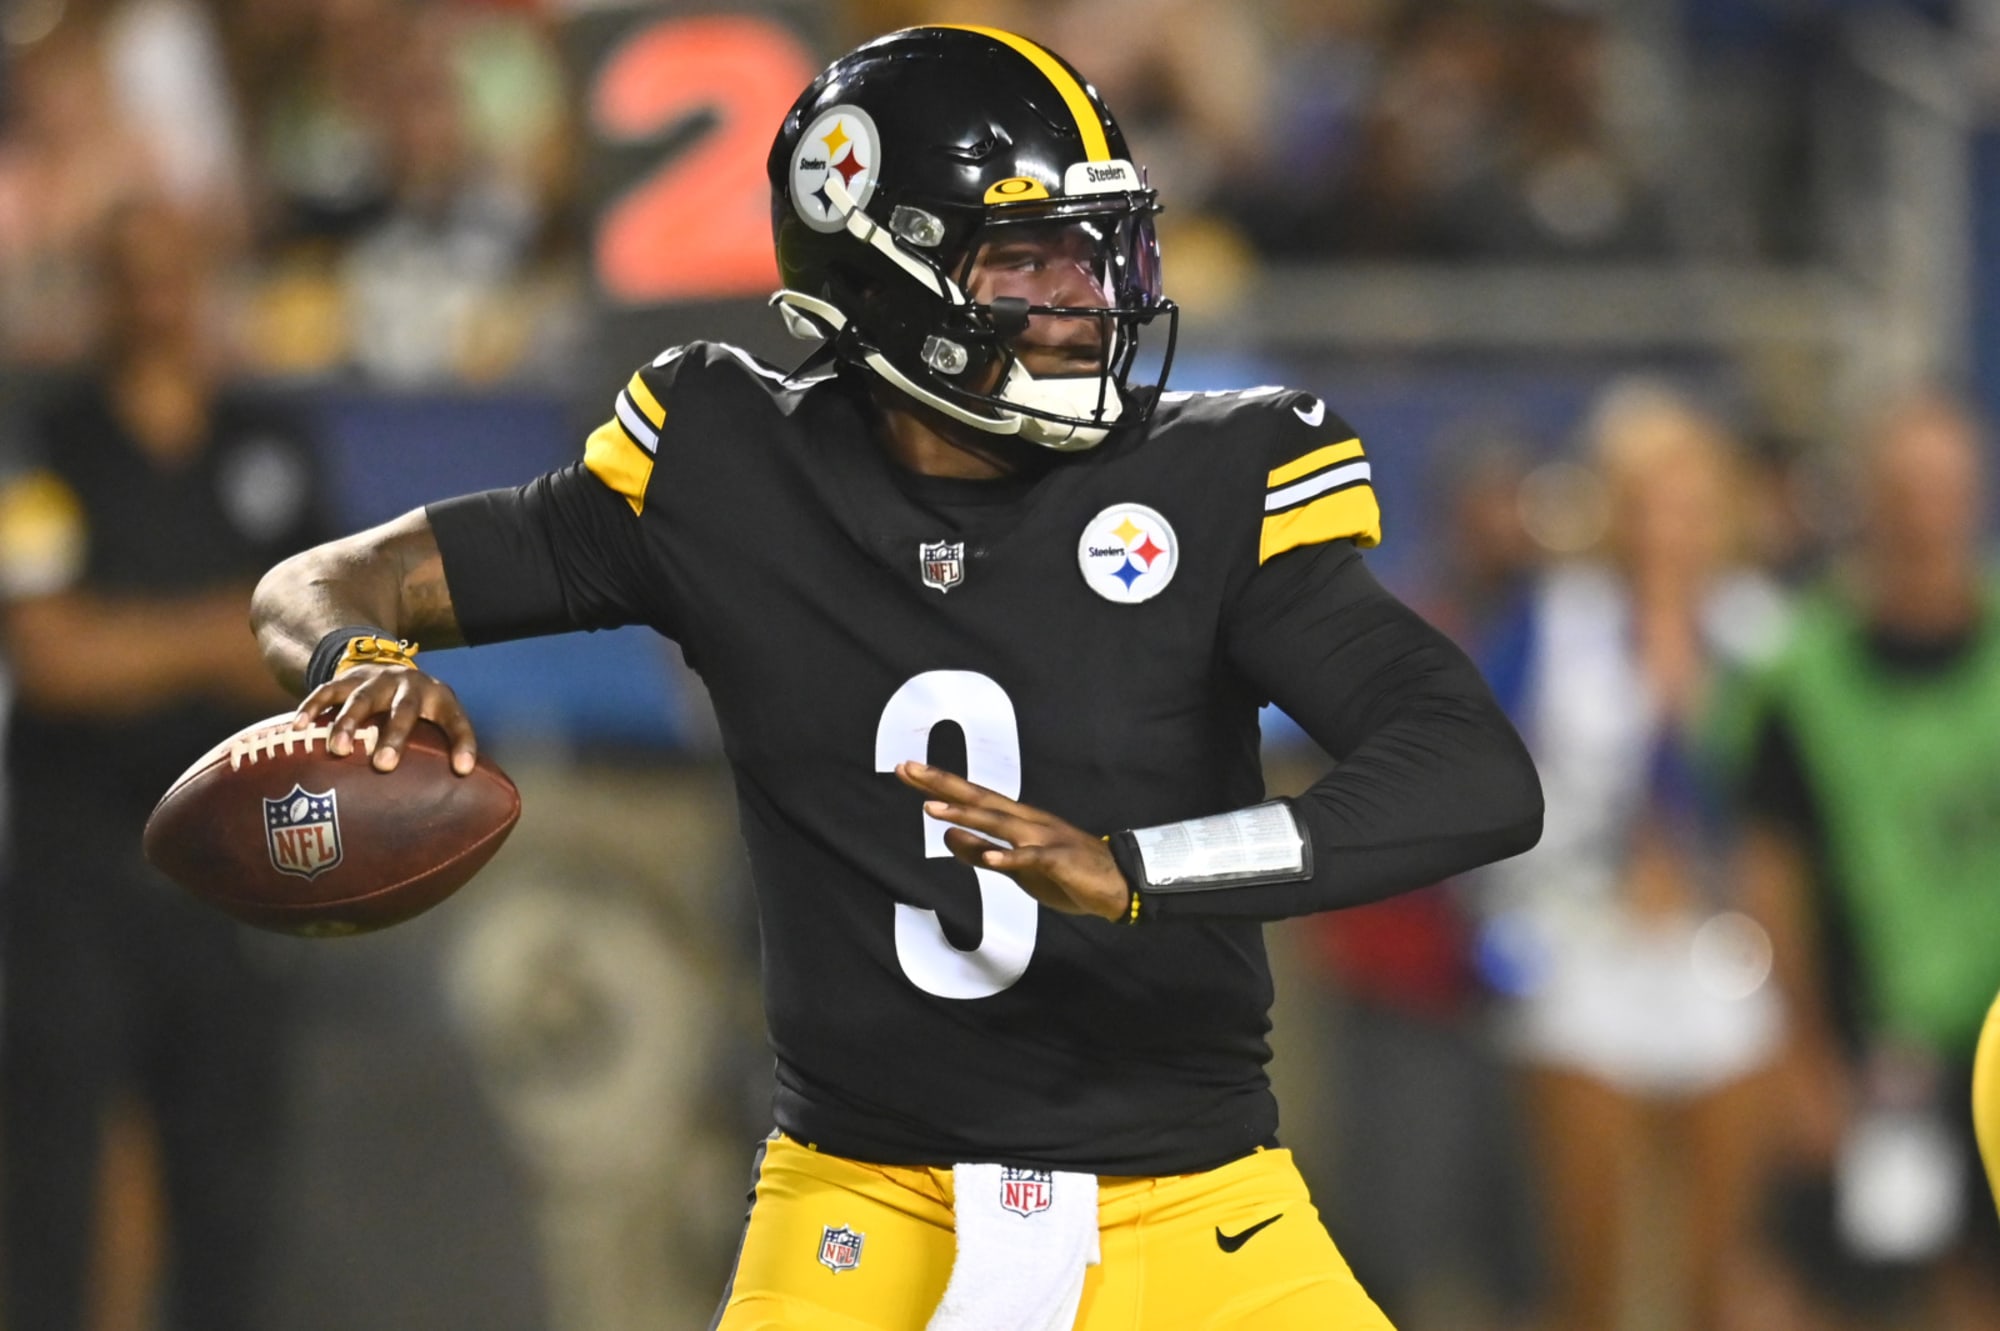 Can Dwayne Haskins become the Steelers future QB